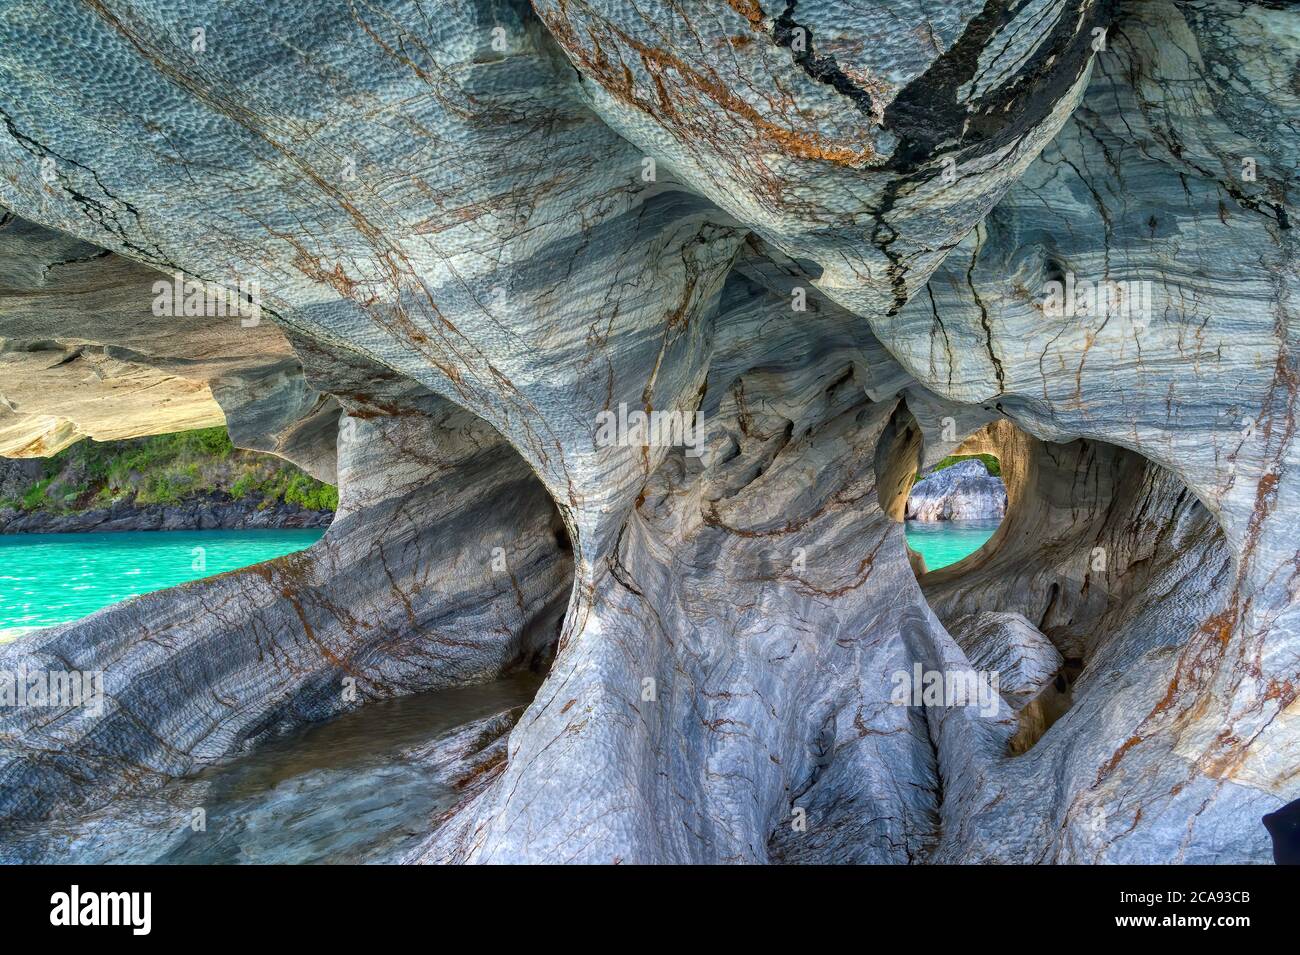 Marble Caves Sanctuary caused by water erosion, General Carrera Lake, Puerto Rio Tranquilo, Aysen Region, Patagonia, Chile, South America Stock Photo